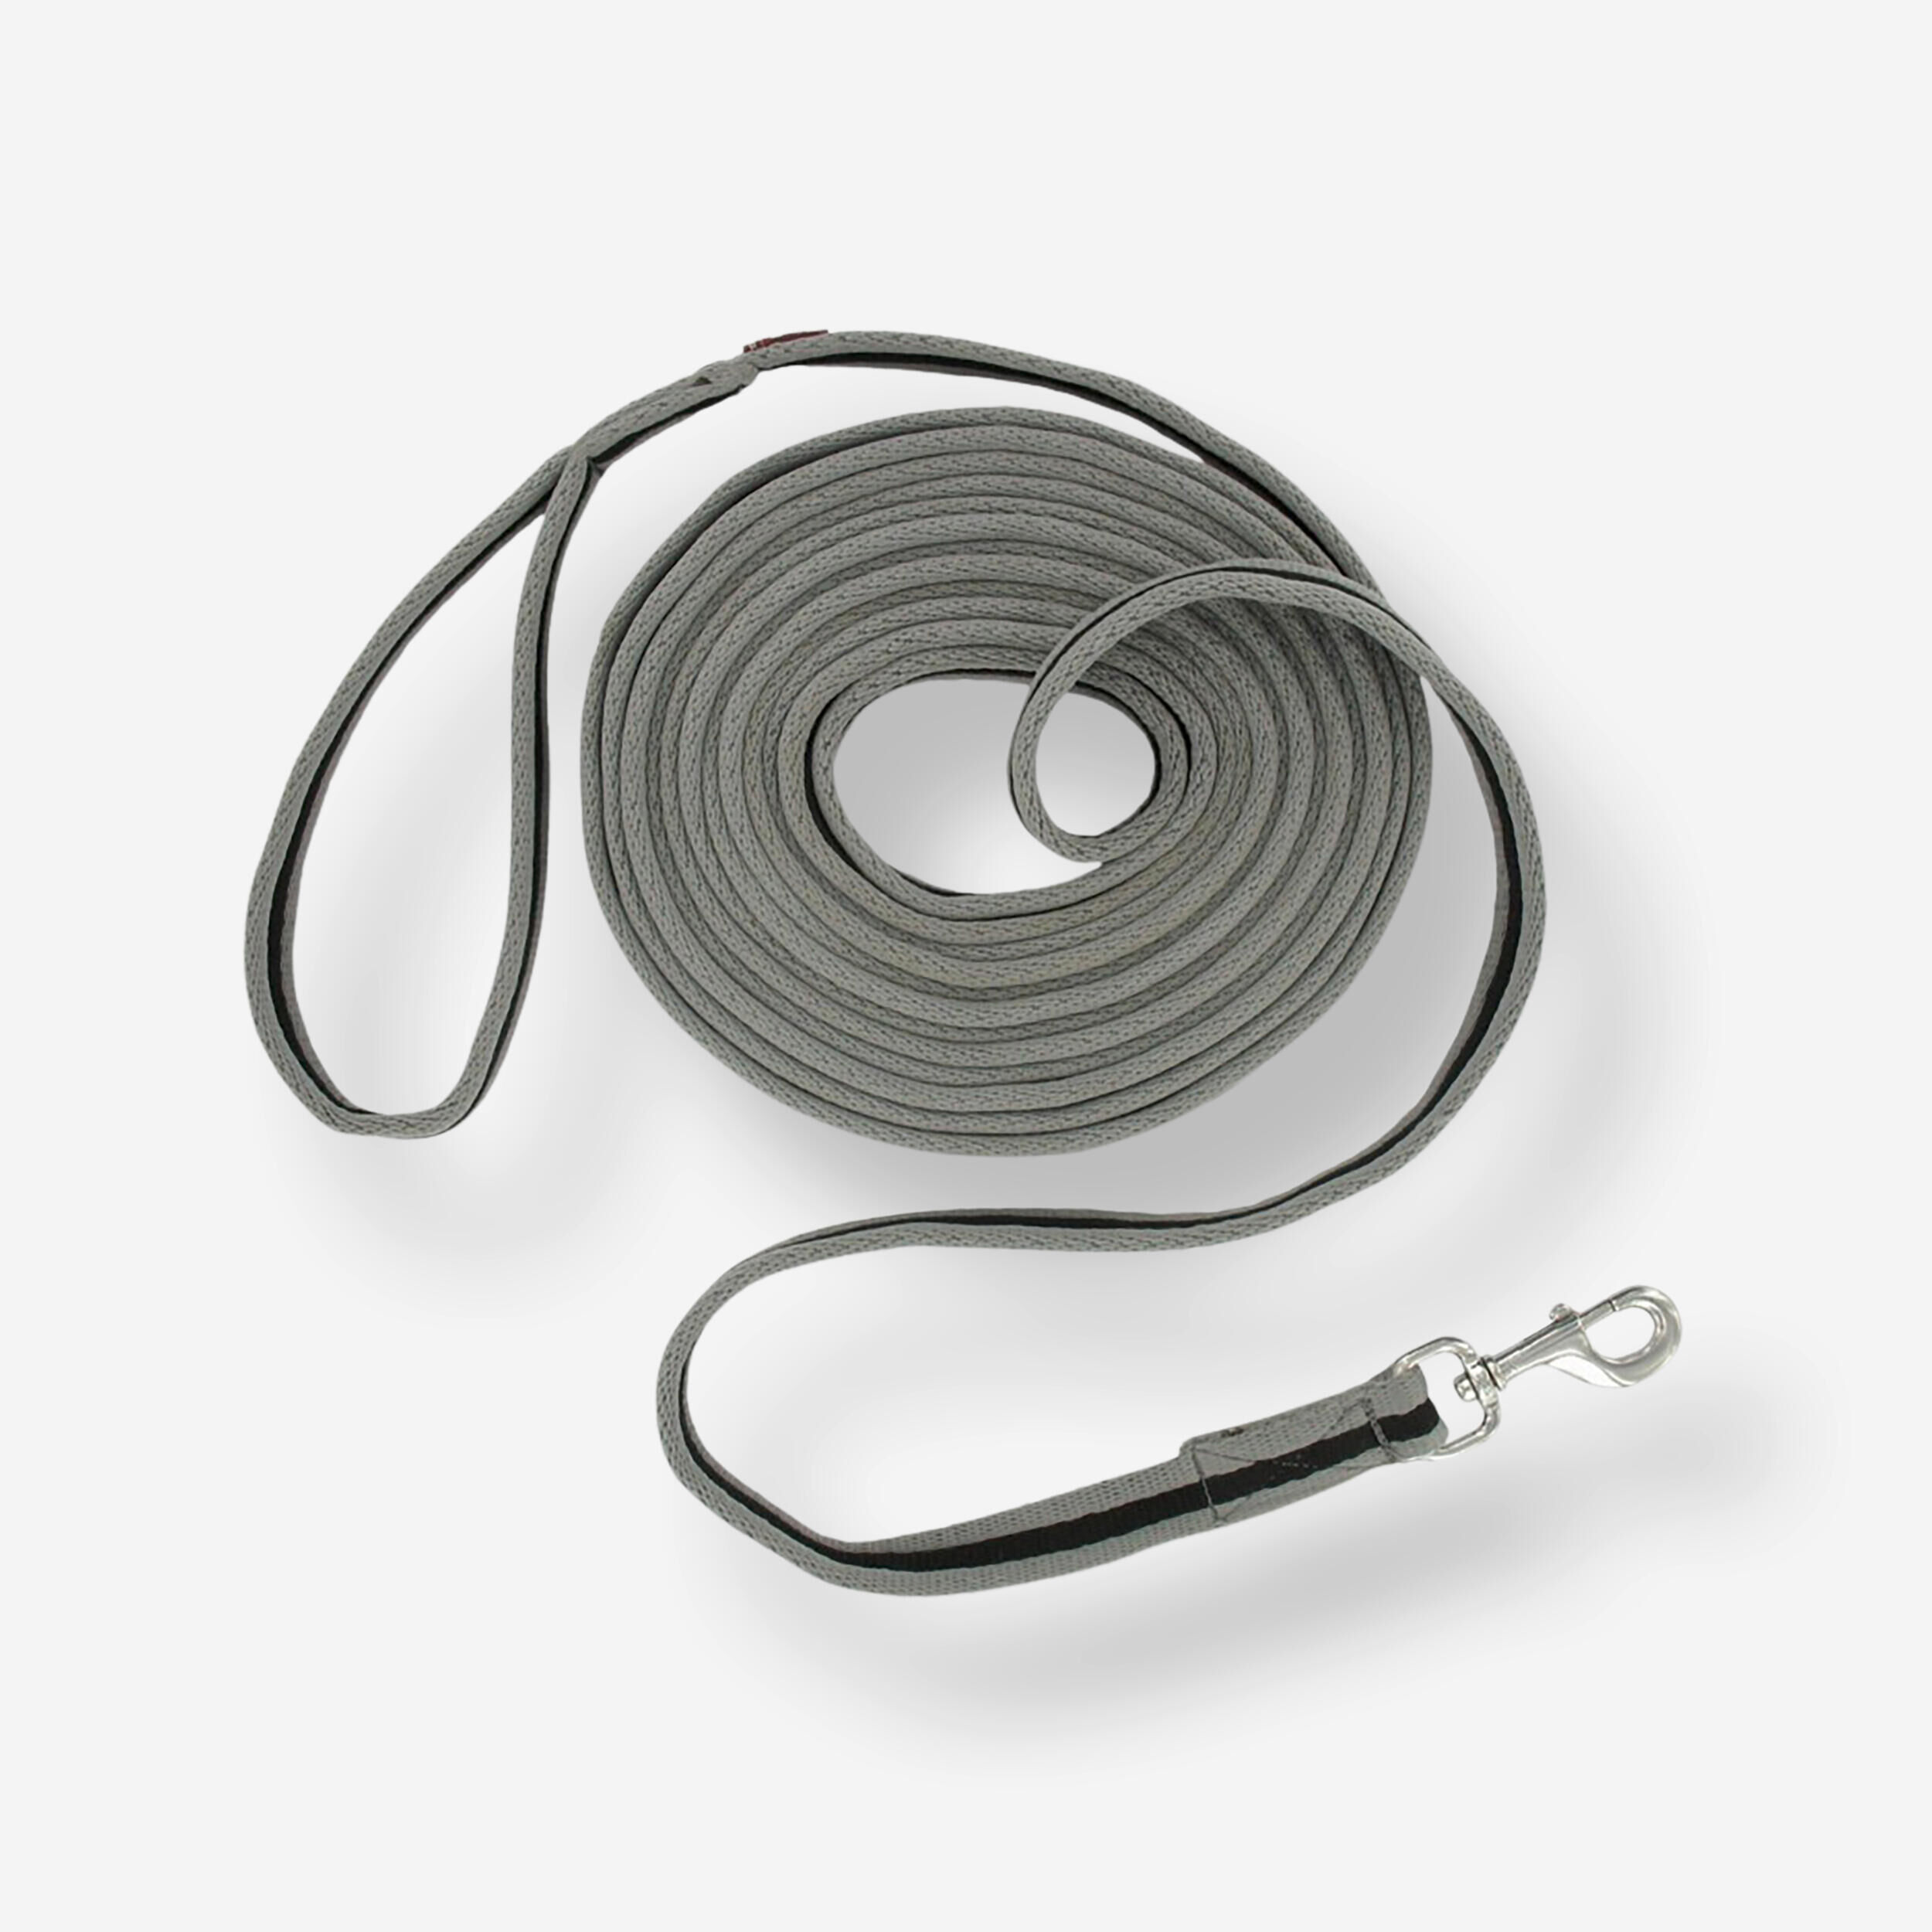 FOUGANZA Horse Riding Leadrope for Horse and Pony Soft - Grey/Black